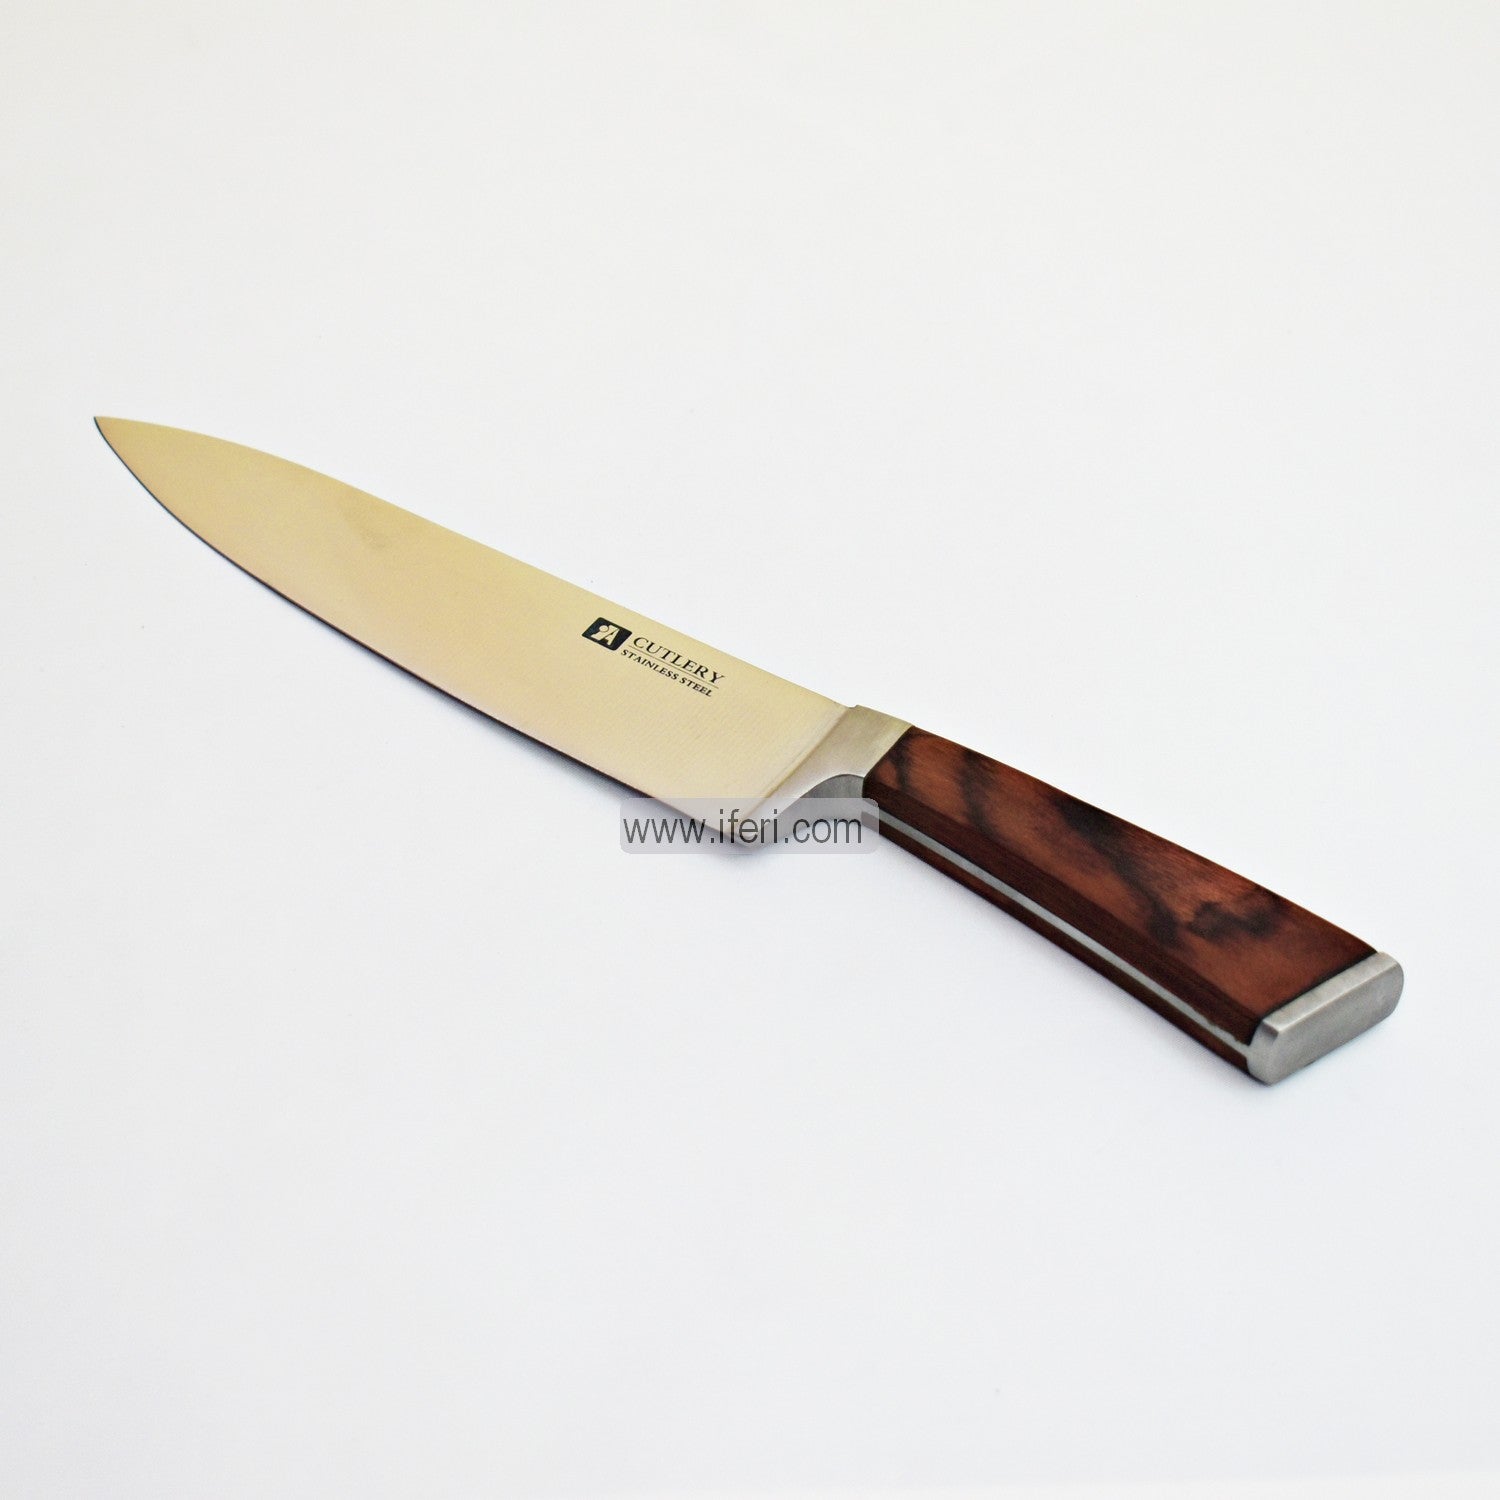 13 inch Wooden Handle Kitchen Knife TG0932